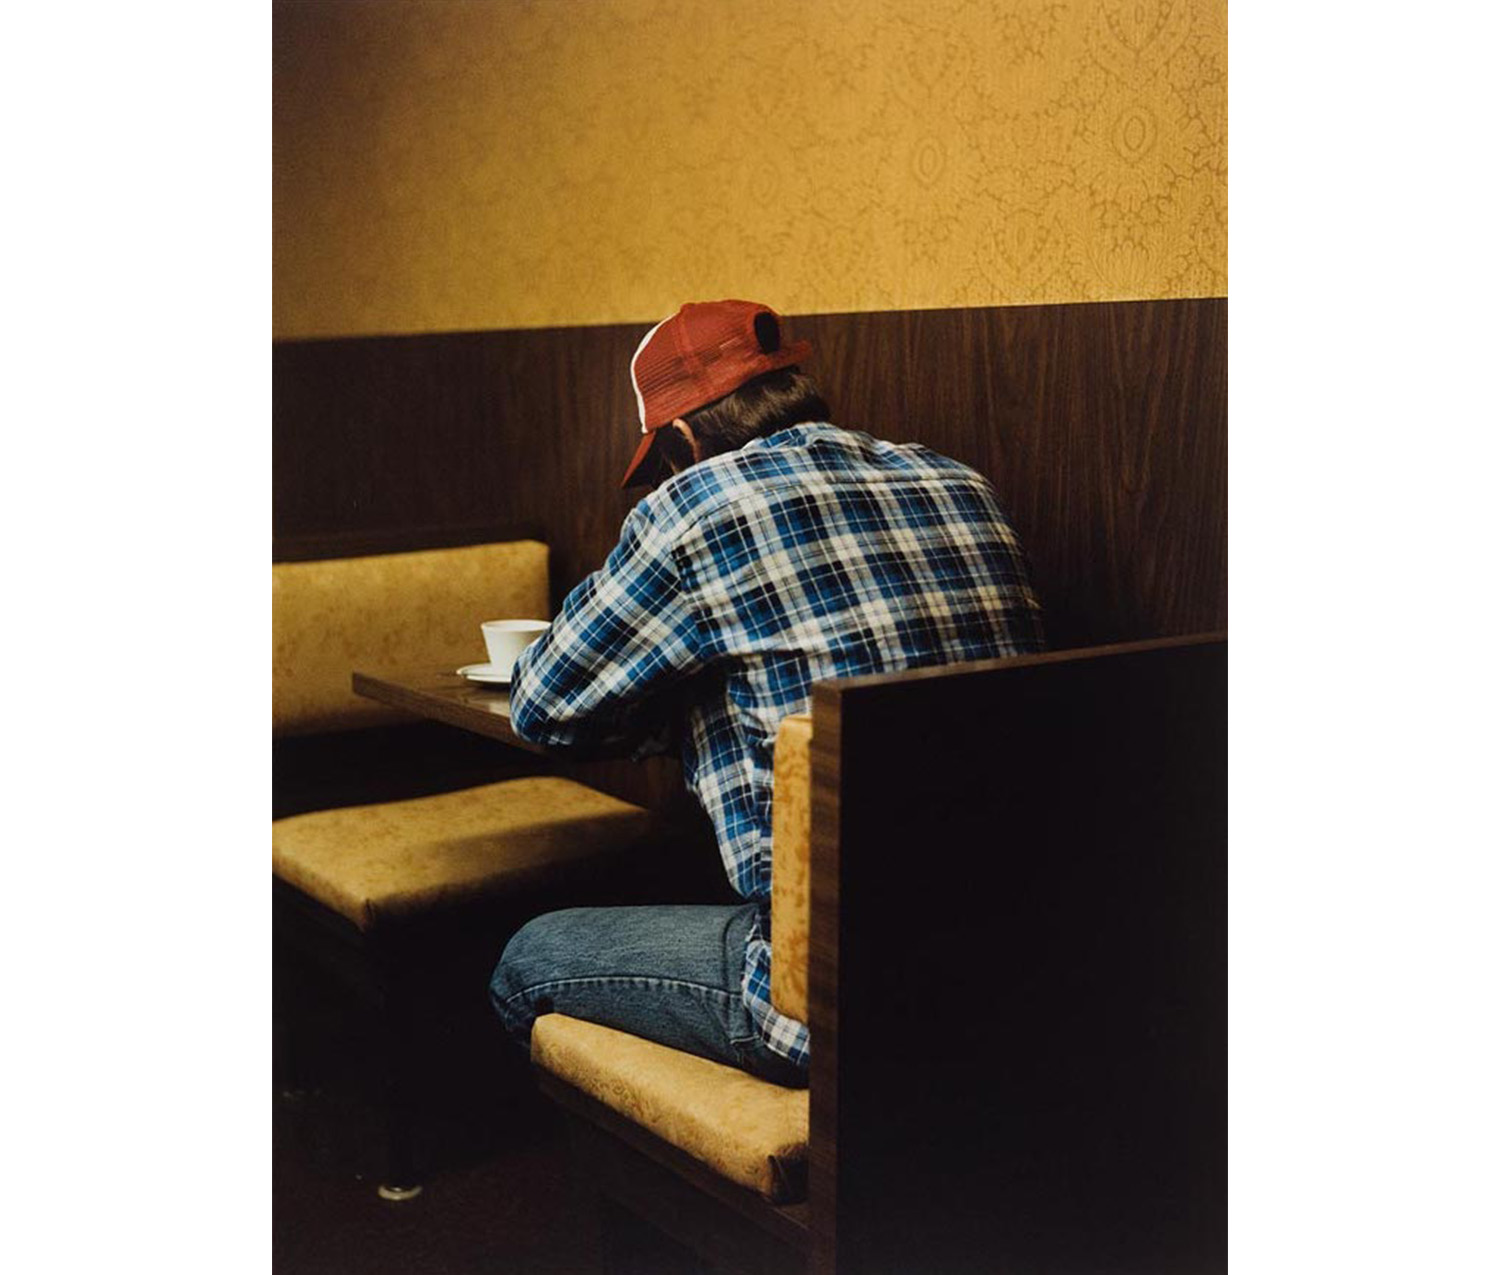 interior, back of a man with red baseball hat, blue plaid shirt and jeans seated at a booth made of wood grain laminate and gold cloth with a cup of coffee on the table before him